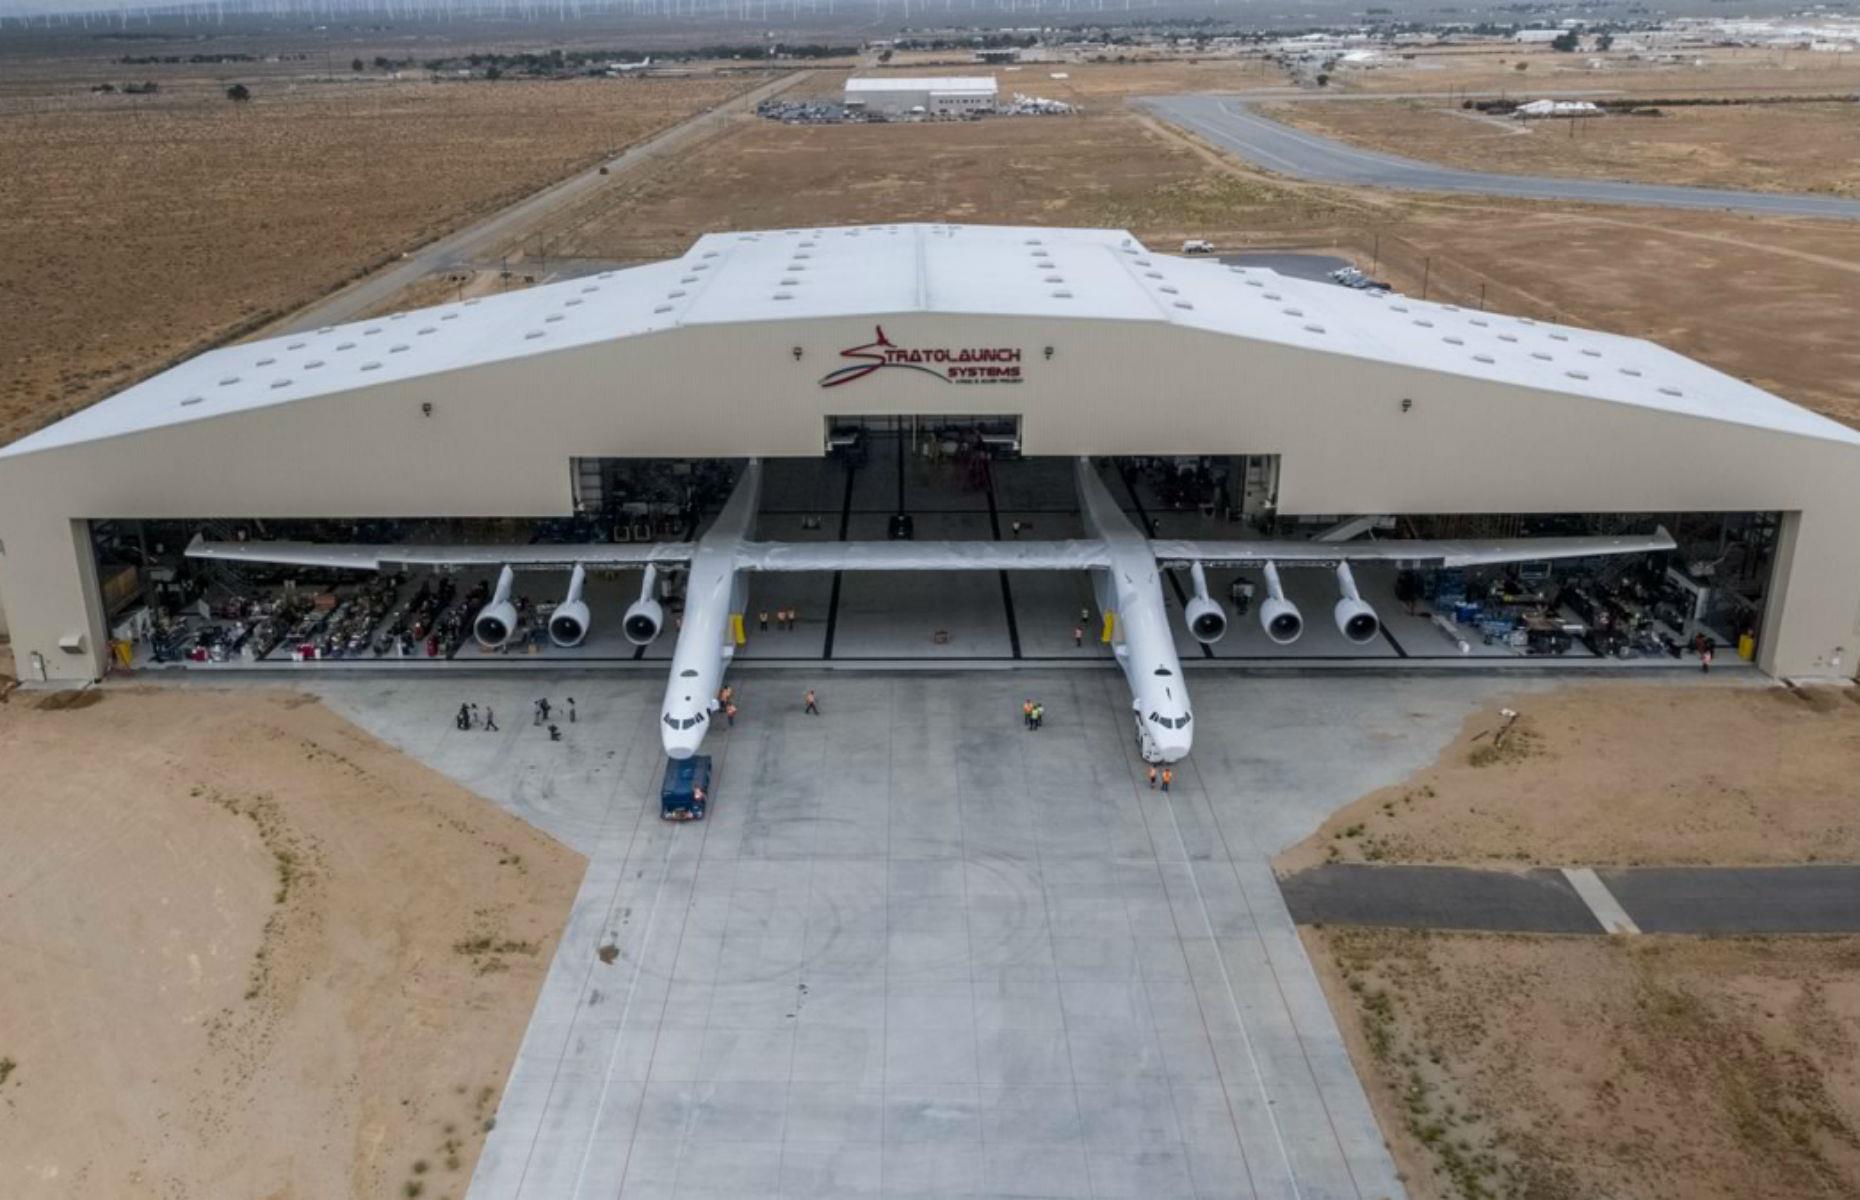 <p>A current Guinness world record holder, the Stratolaunch has the largest wingspan of any plane ever created – an enormous 385 feet (117m). That’s greater than the length of an American football field. The plane was dreamed up by Microsoft co-founder Paul Allen, and was rolled out of its California hangar for the first time in May 2017.</p>